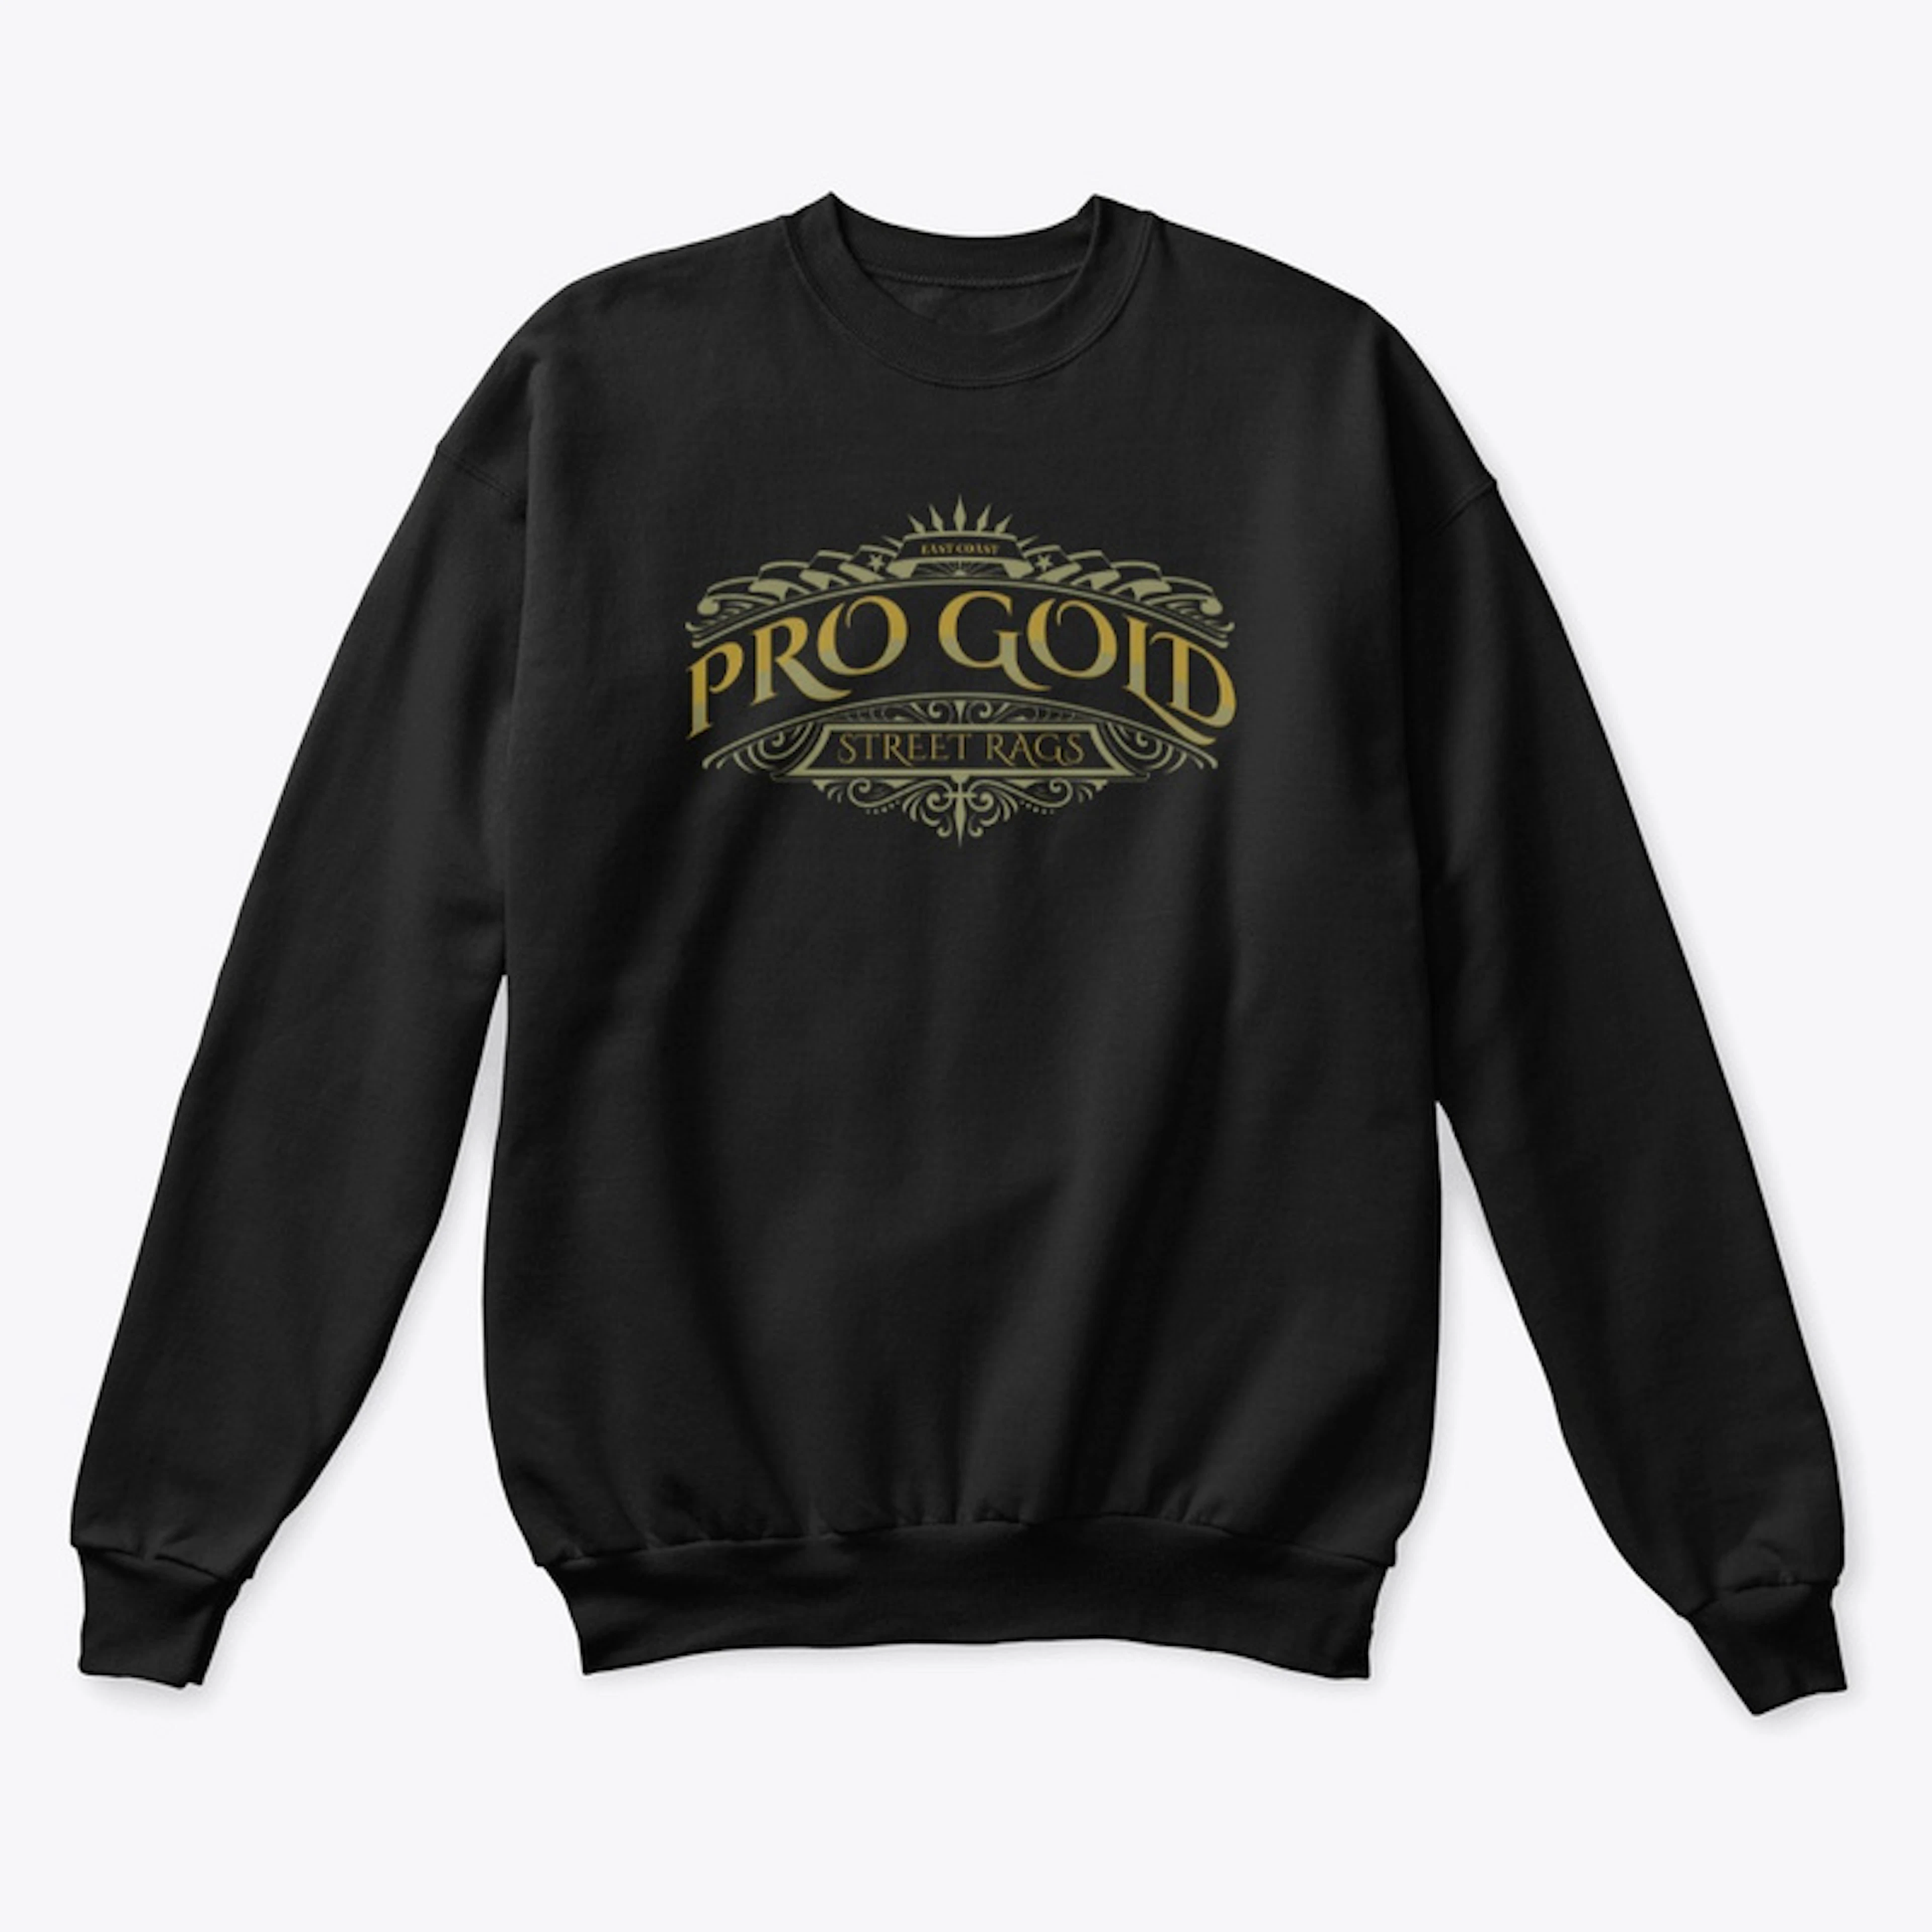 PRO GOLD STREET RAGS GRIME